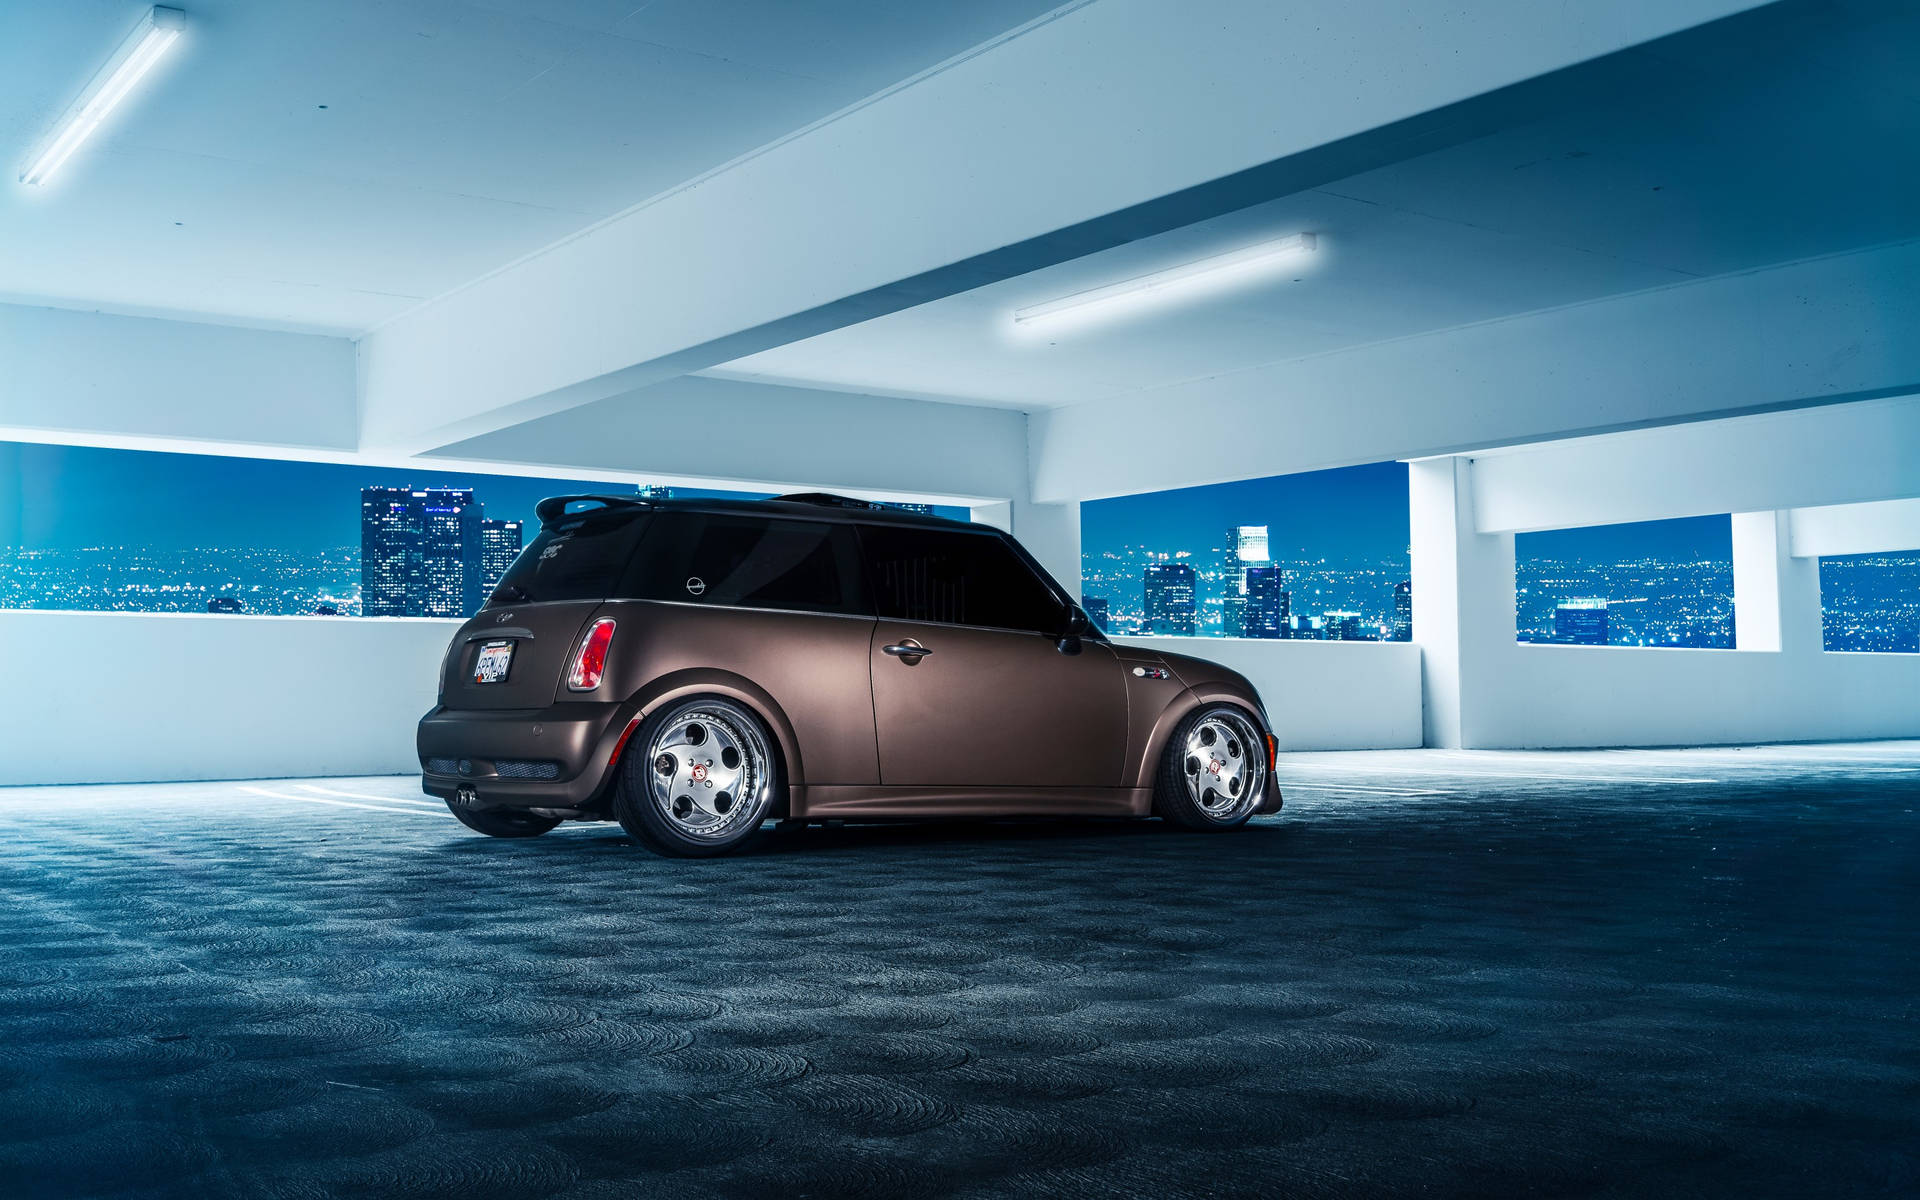 Mini Cooper In Elevated Parking Space Wallpaper